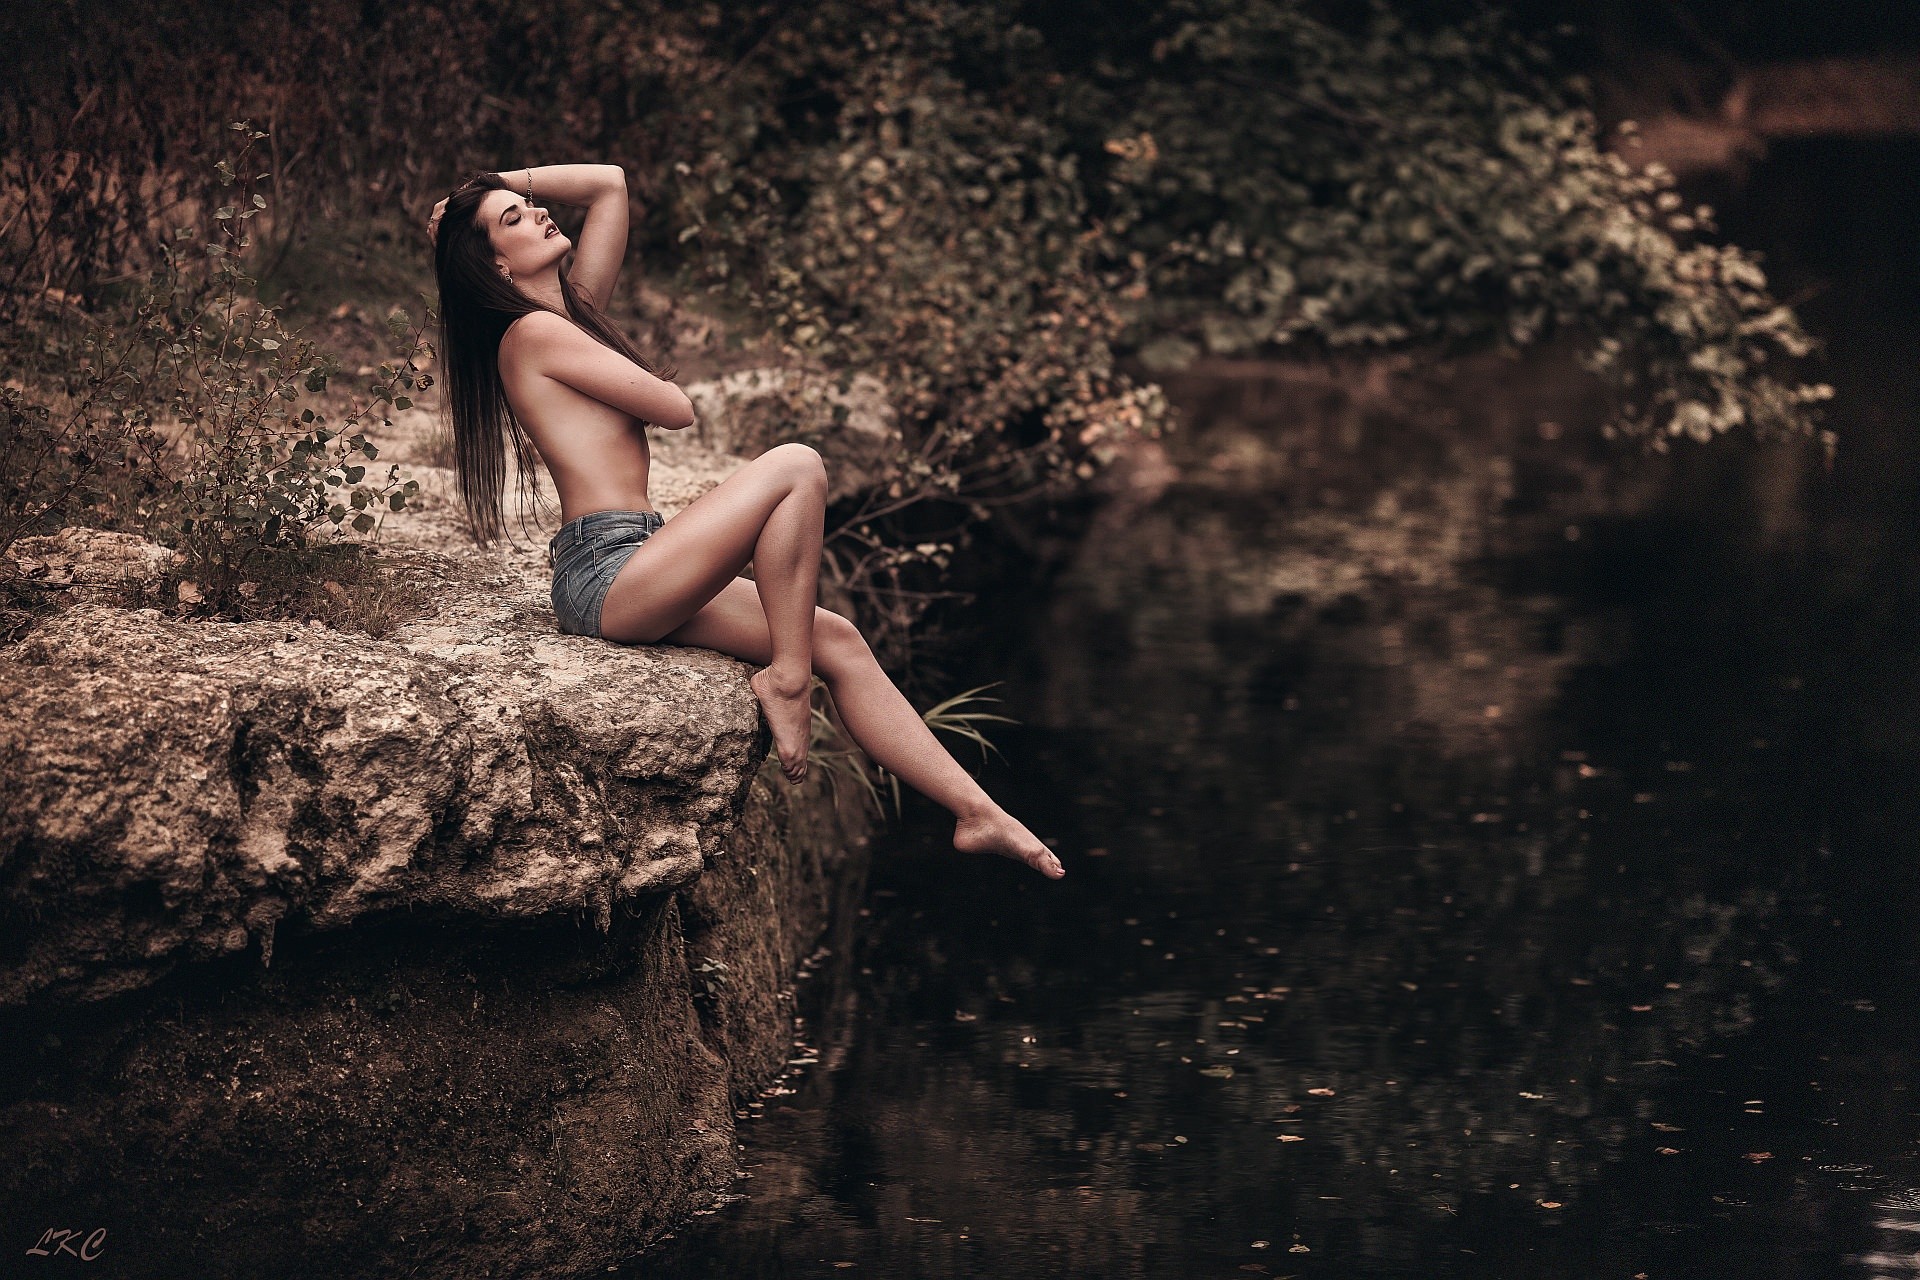 People 1920x1280 women strategic covering sitting river closed eyes jean shorts outdoors women outdoors partially clothed Laurent Kace dark hair legs thighs barefoot nature watermarked topless